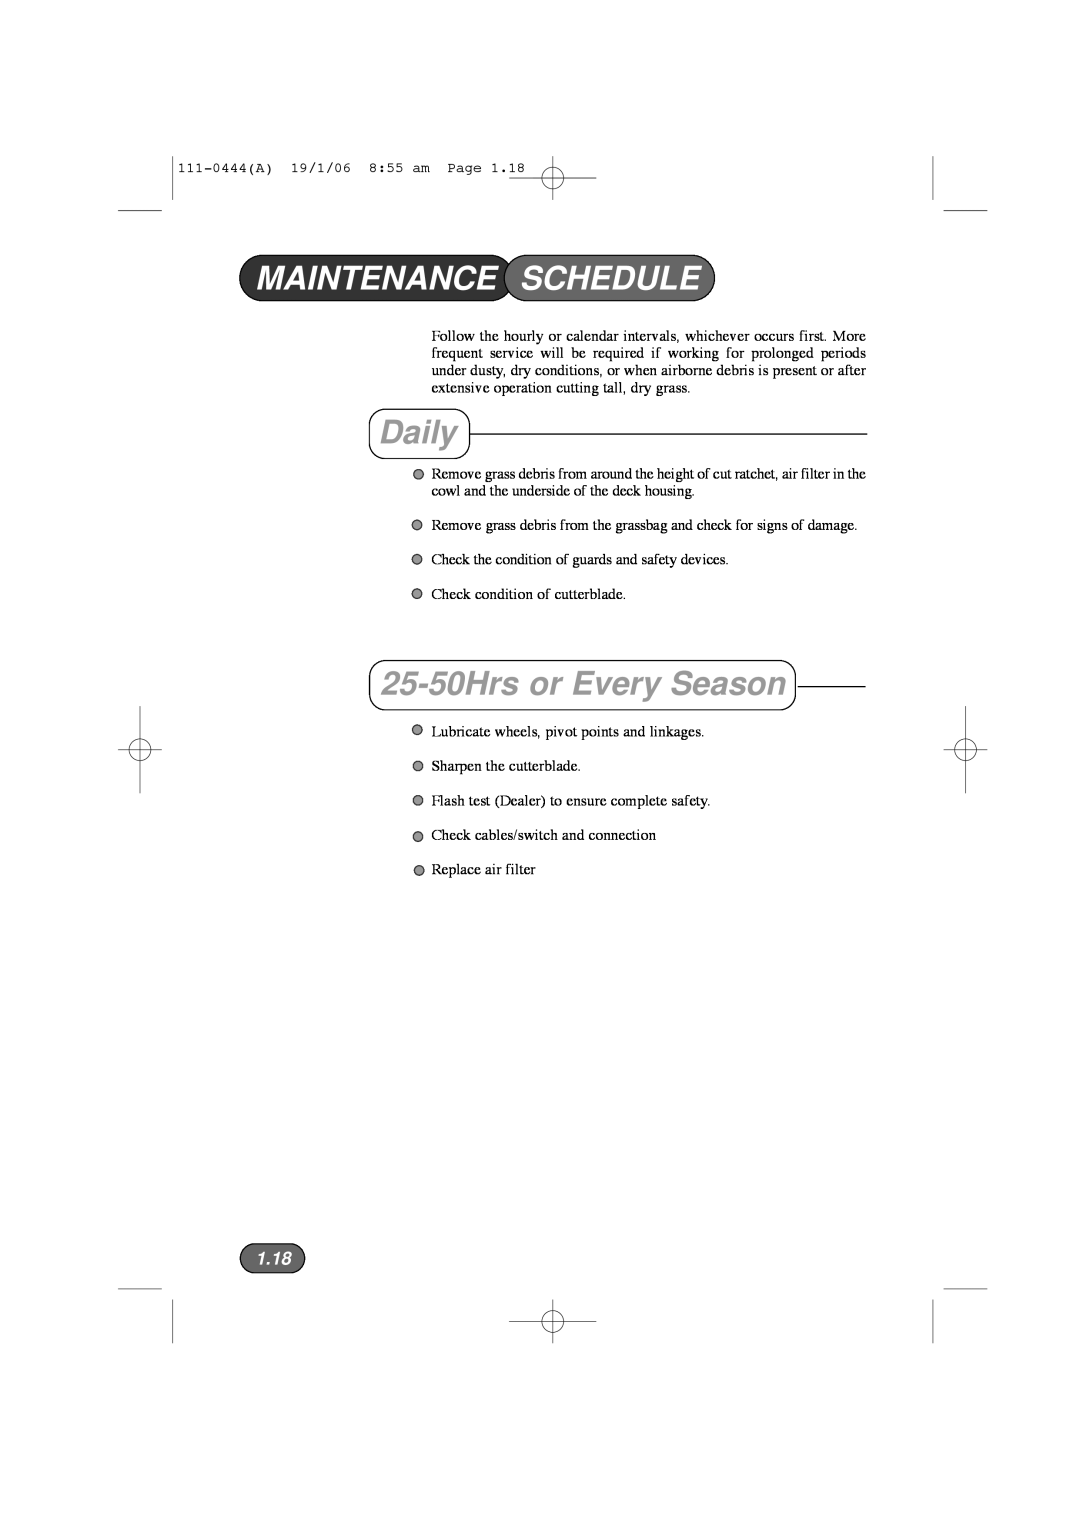 Hayter Mowers 100D manual Maintenance Schedule, Daily, 25-50Hrs or Every Season, 1.18 